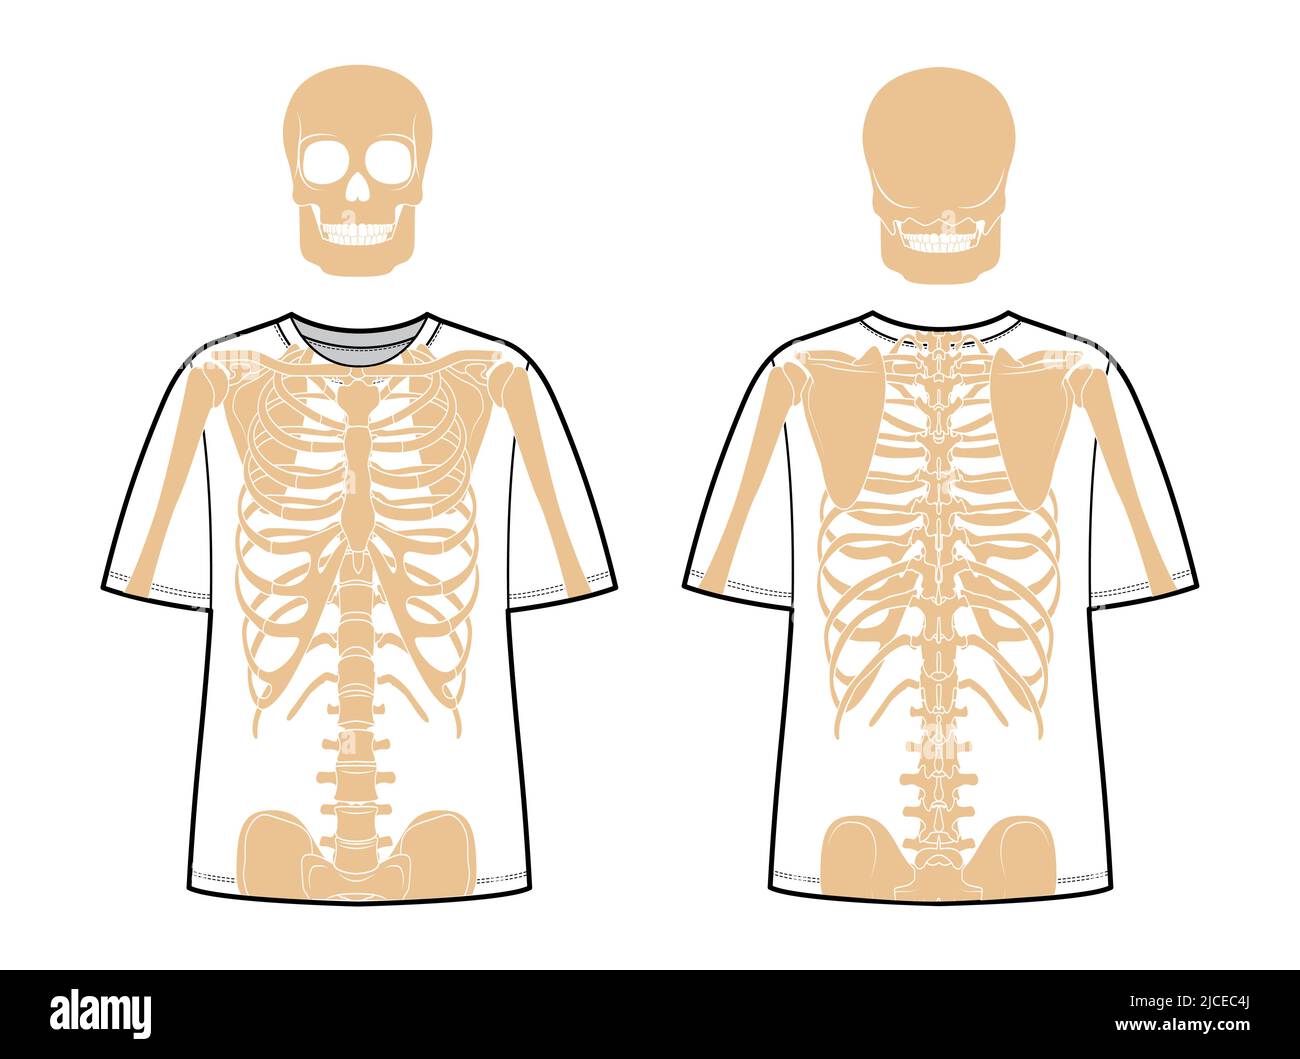 Set of Skeleton costume Human bones on t-shirts front back view men women, children for printing on clothes for Day of the dead flat beige natural color concept Vector illustration of anatomy isolated Stock Vector